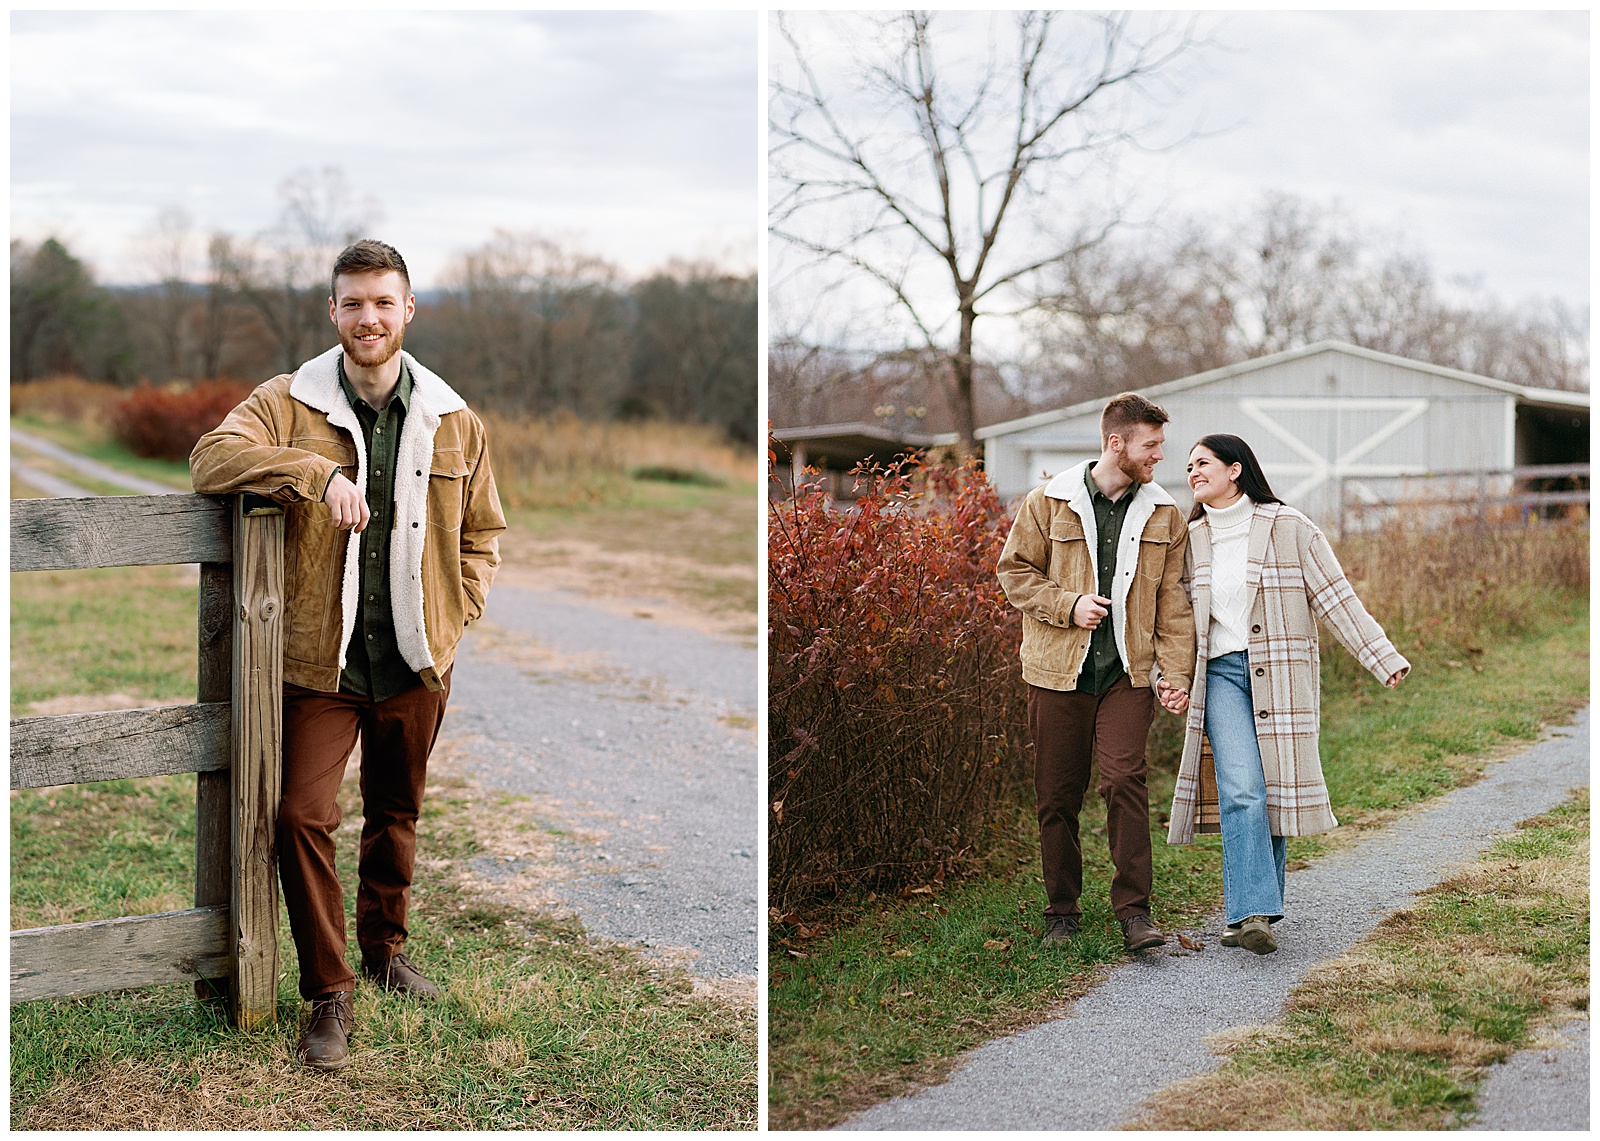 Engaged man and woman wearing winter coats in winter walking with each other at their farm engagement session.